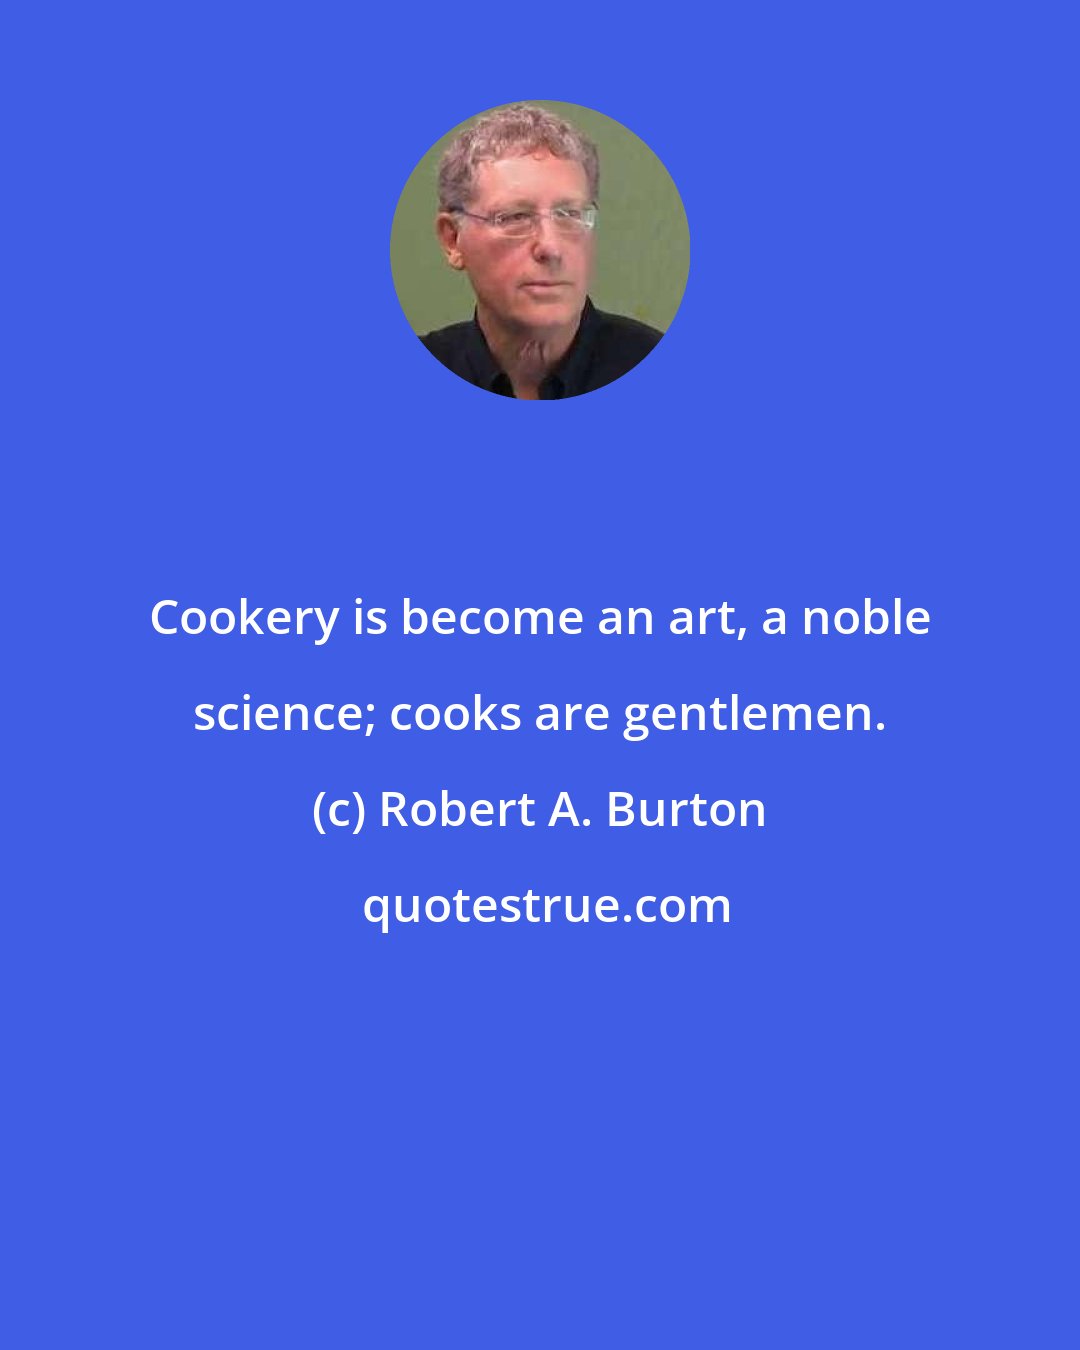 Robert A. Burton: Cookery is become an art, a noble science; cooks are gentlemen.